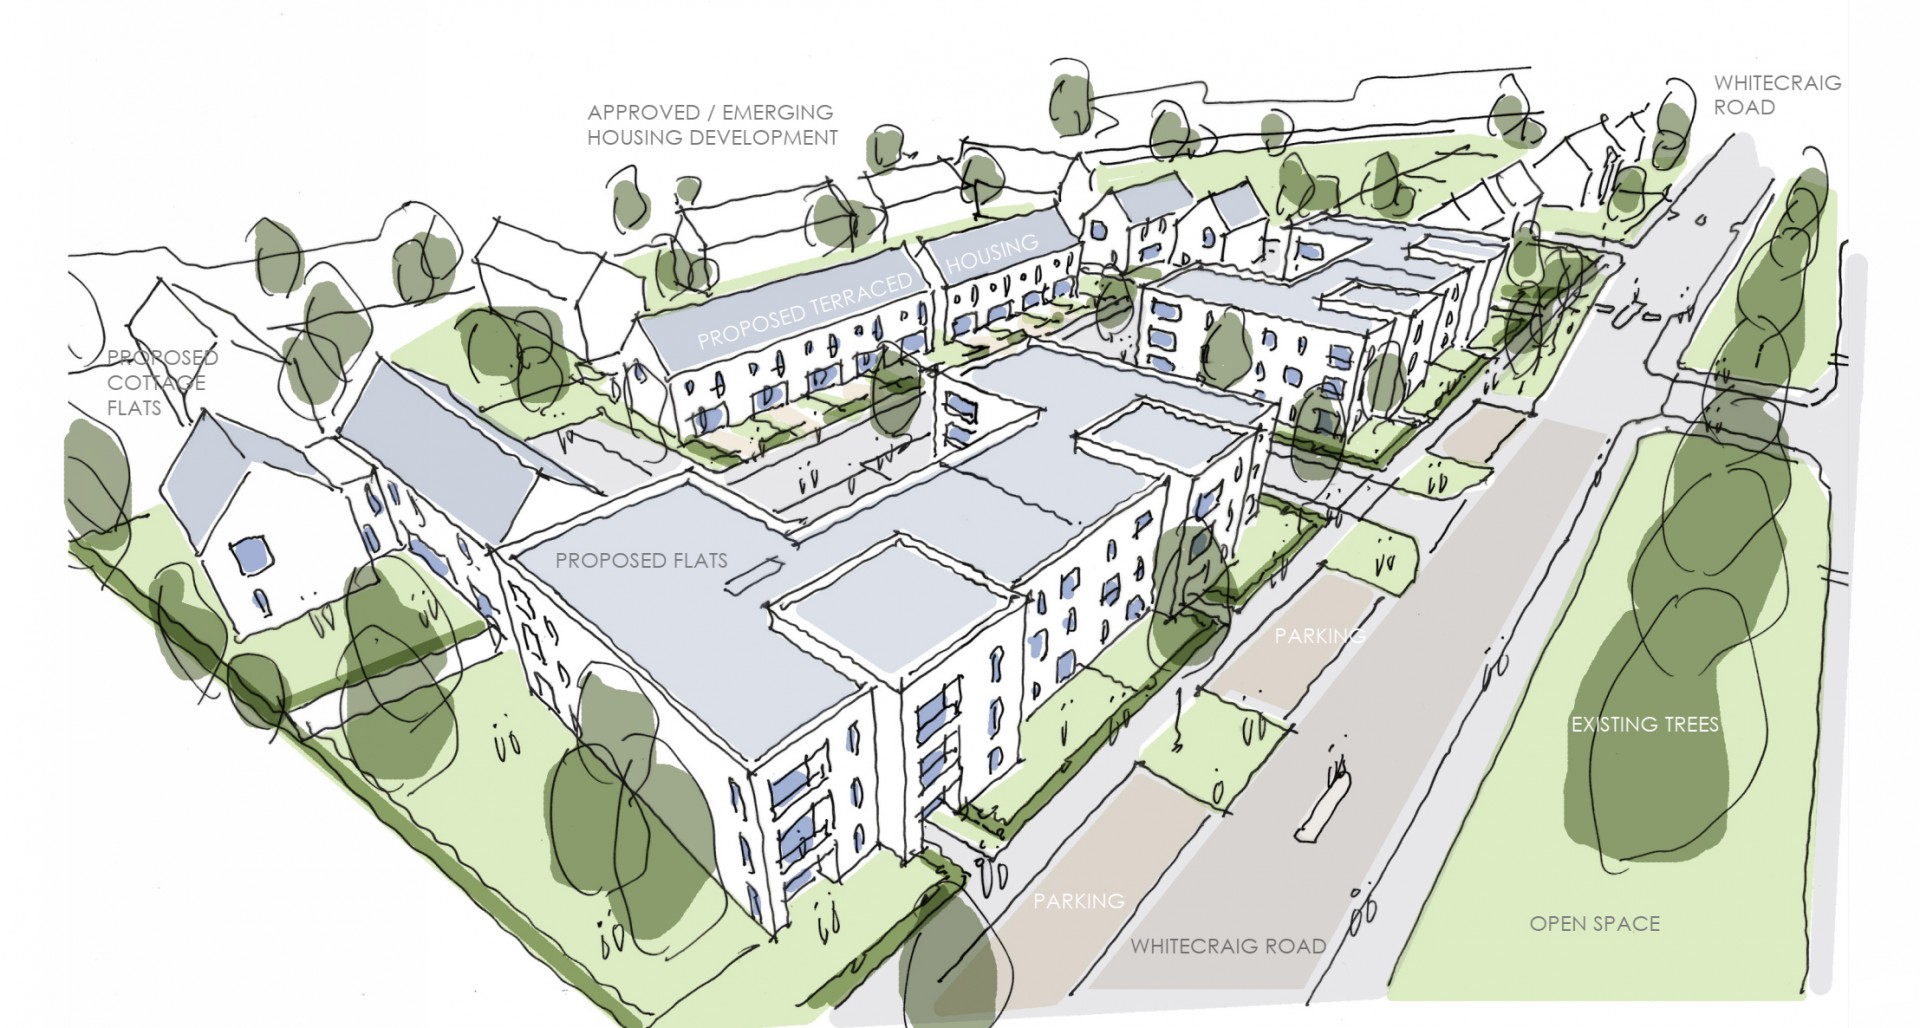 66 affordable homes planned for Whitecraig